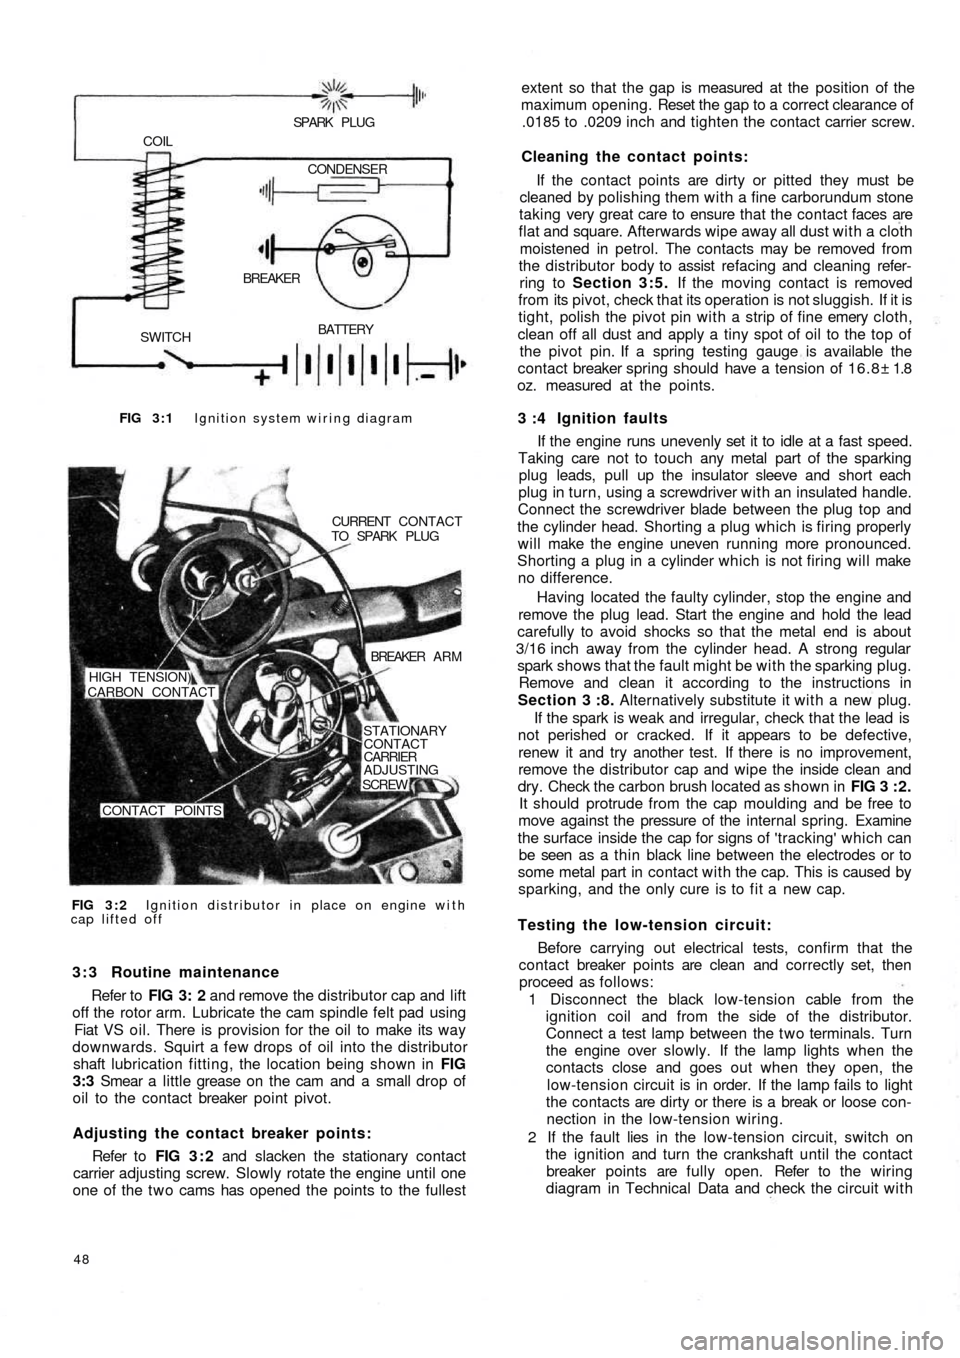 FIAT 500 1968 1.G Service Manual FIG 3 : 1 Ignition system wiring diagram
BATTERY
SWITCHBREAKER COIL
SPARK  PLUG
CONDENSER
FIG 3 : 2 Ignition distributor in place on engine with
cap lifted offCURRENT  CONTACT
TO  SPARK  PLUG
BREAKER 